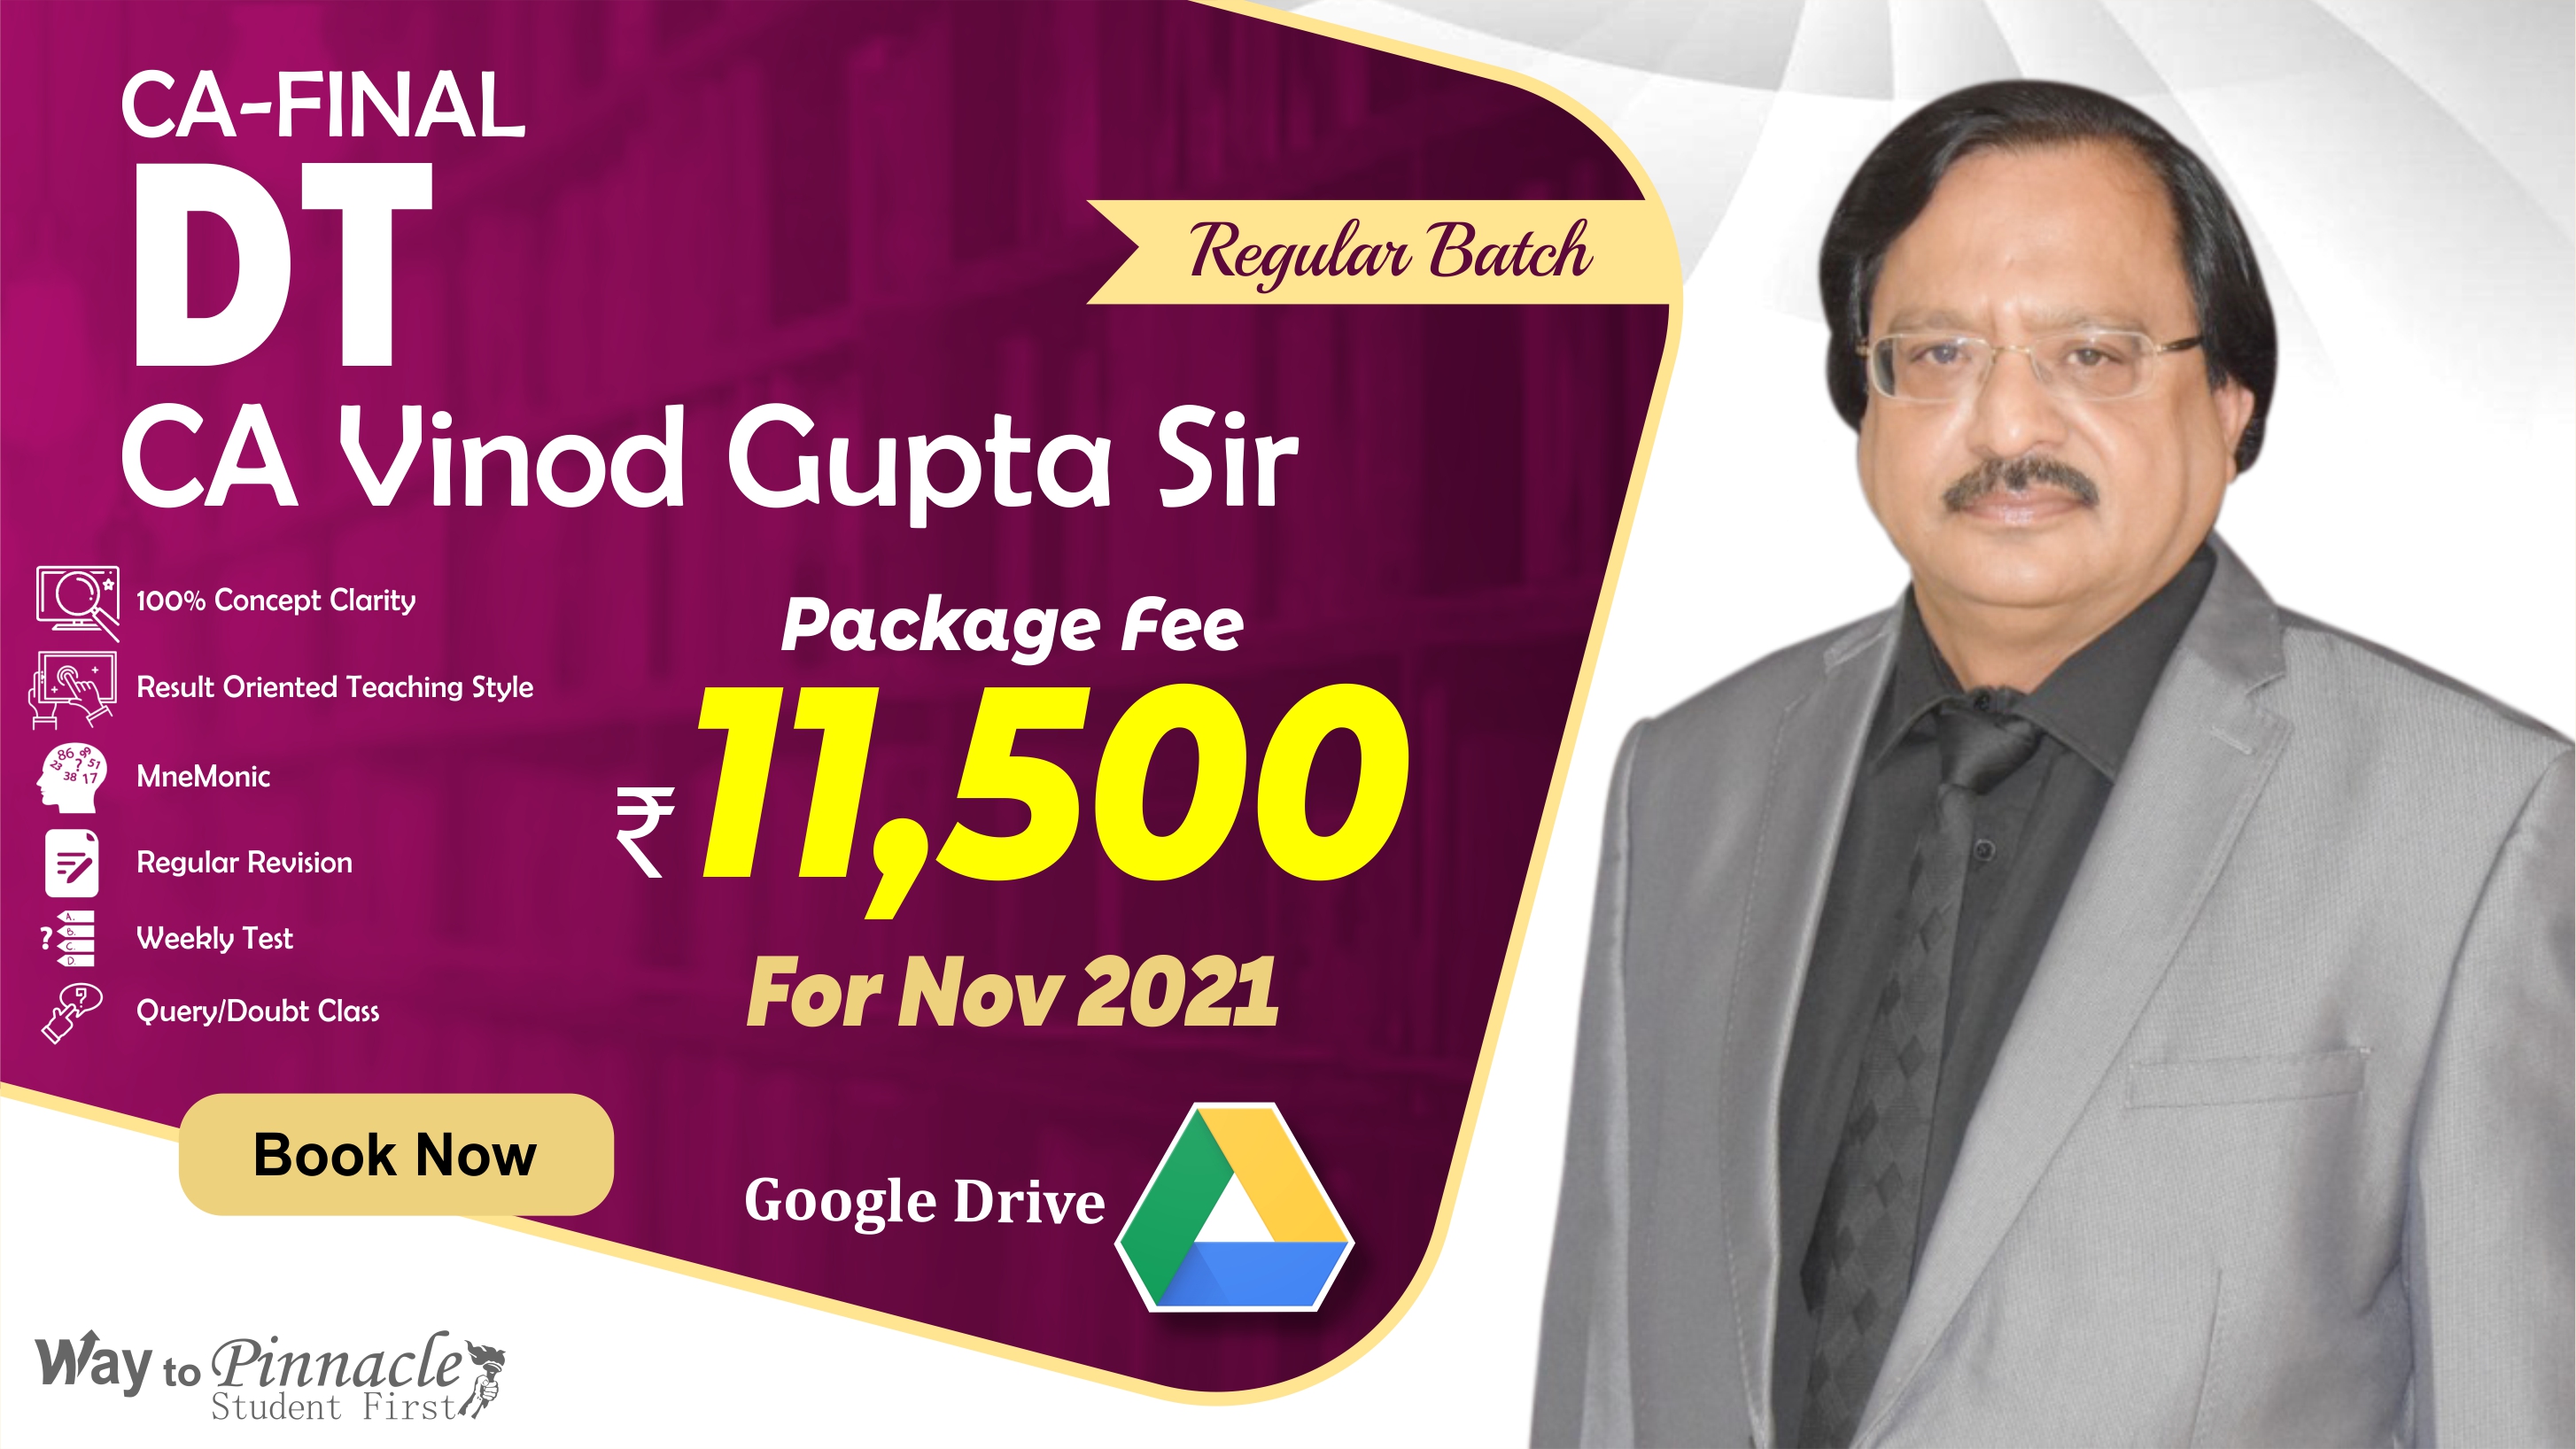 CA Final DT Google Drive Classes by CA Vinod Gupta Sir For Nov 21 Attempt- Full HD Video Lecture + HQ Sound